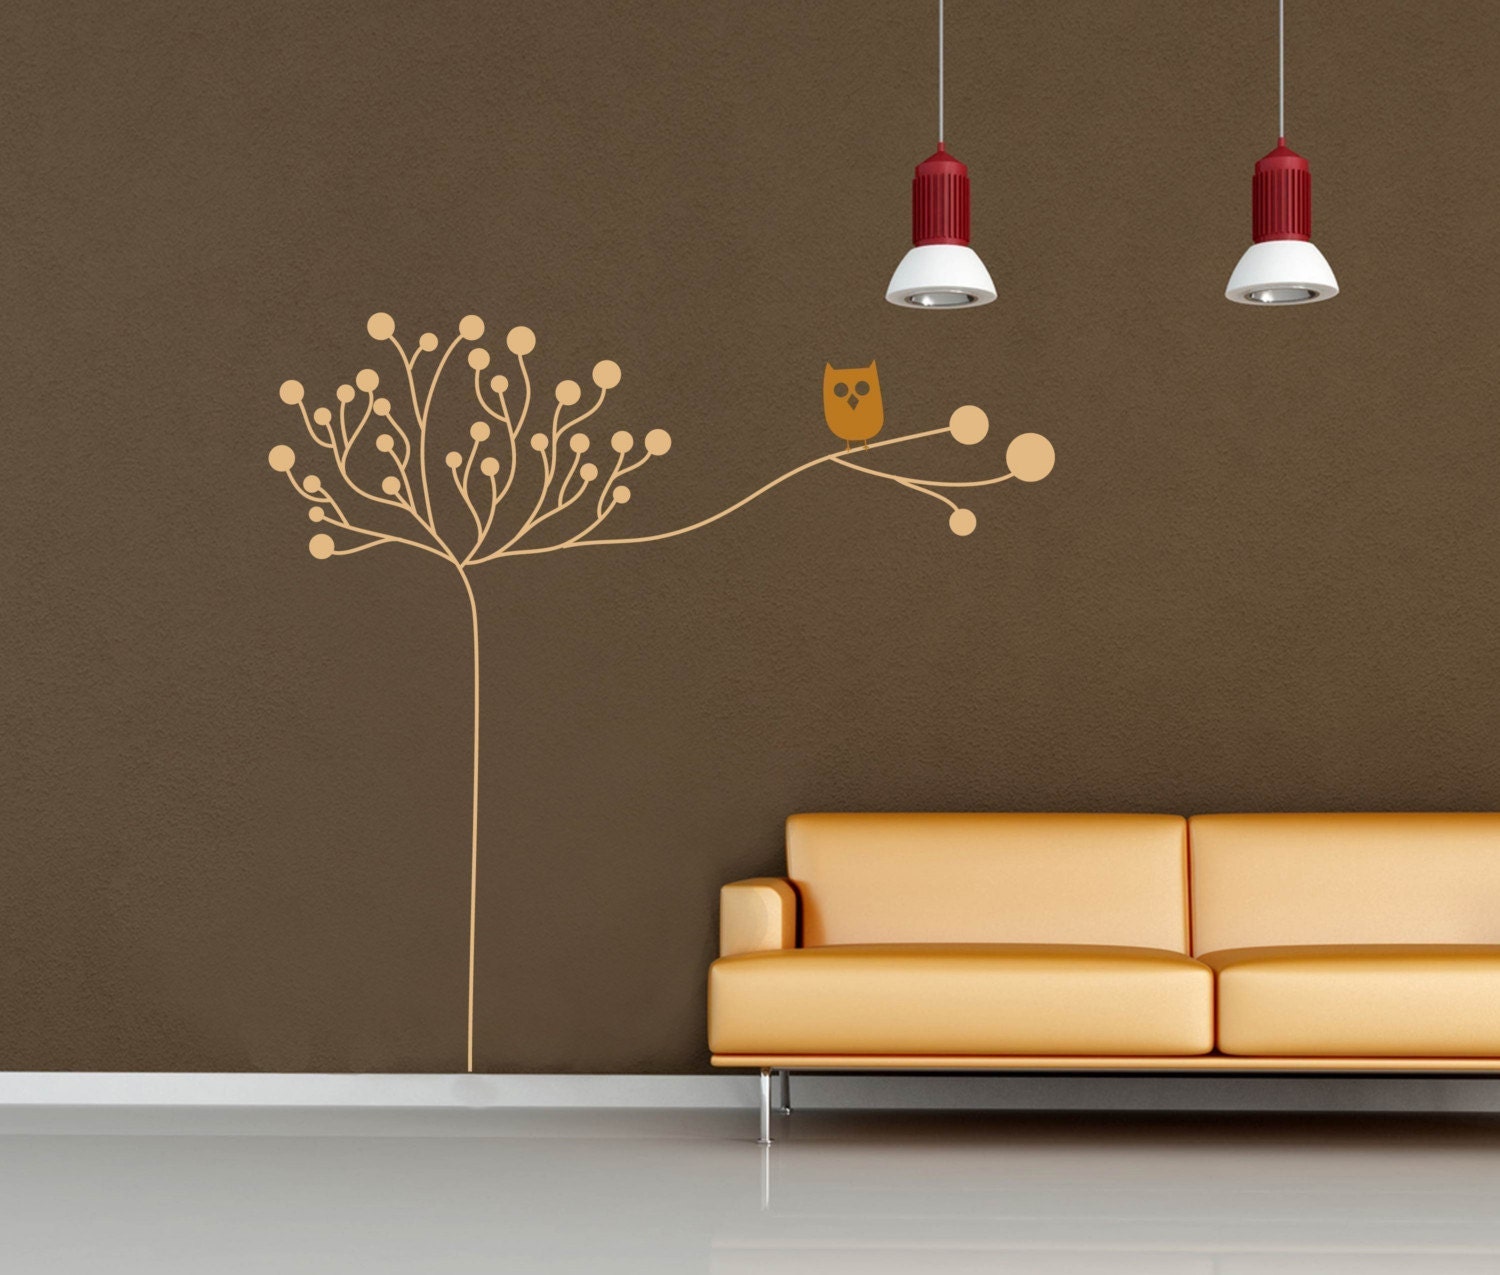 Owl on a Tree Design -- LARGE WALL DECAL -- Choose Two Colors